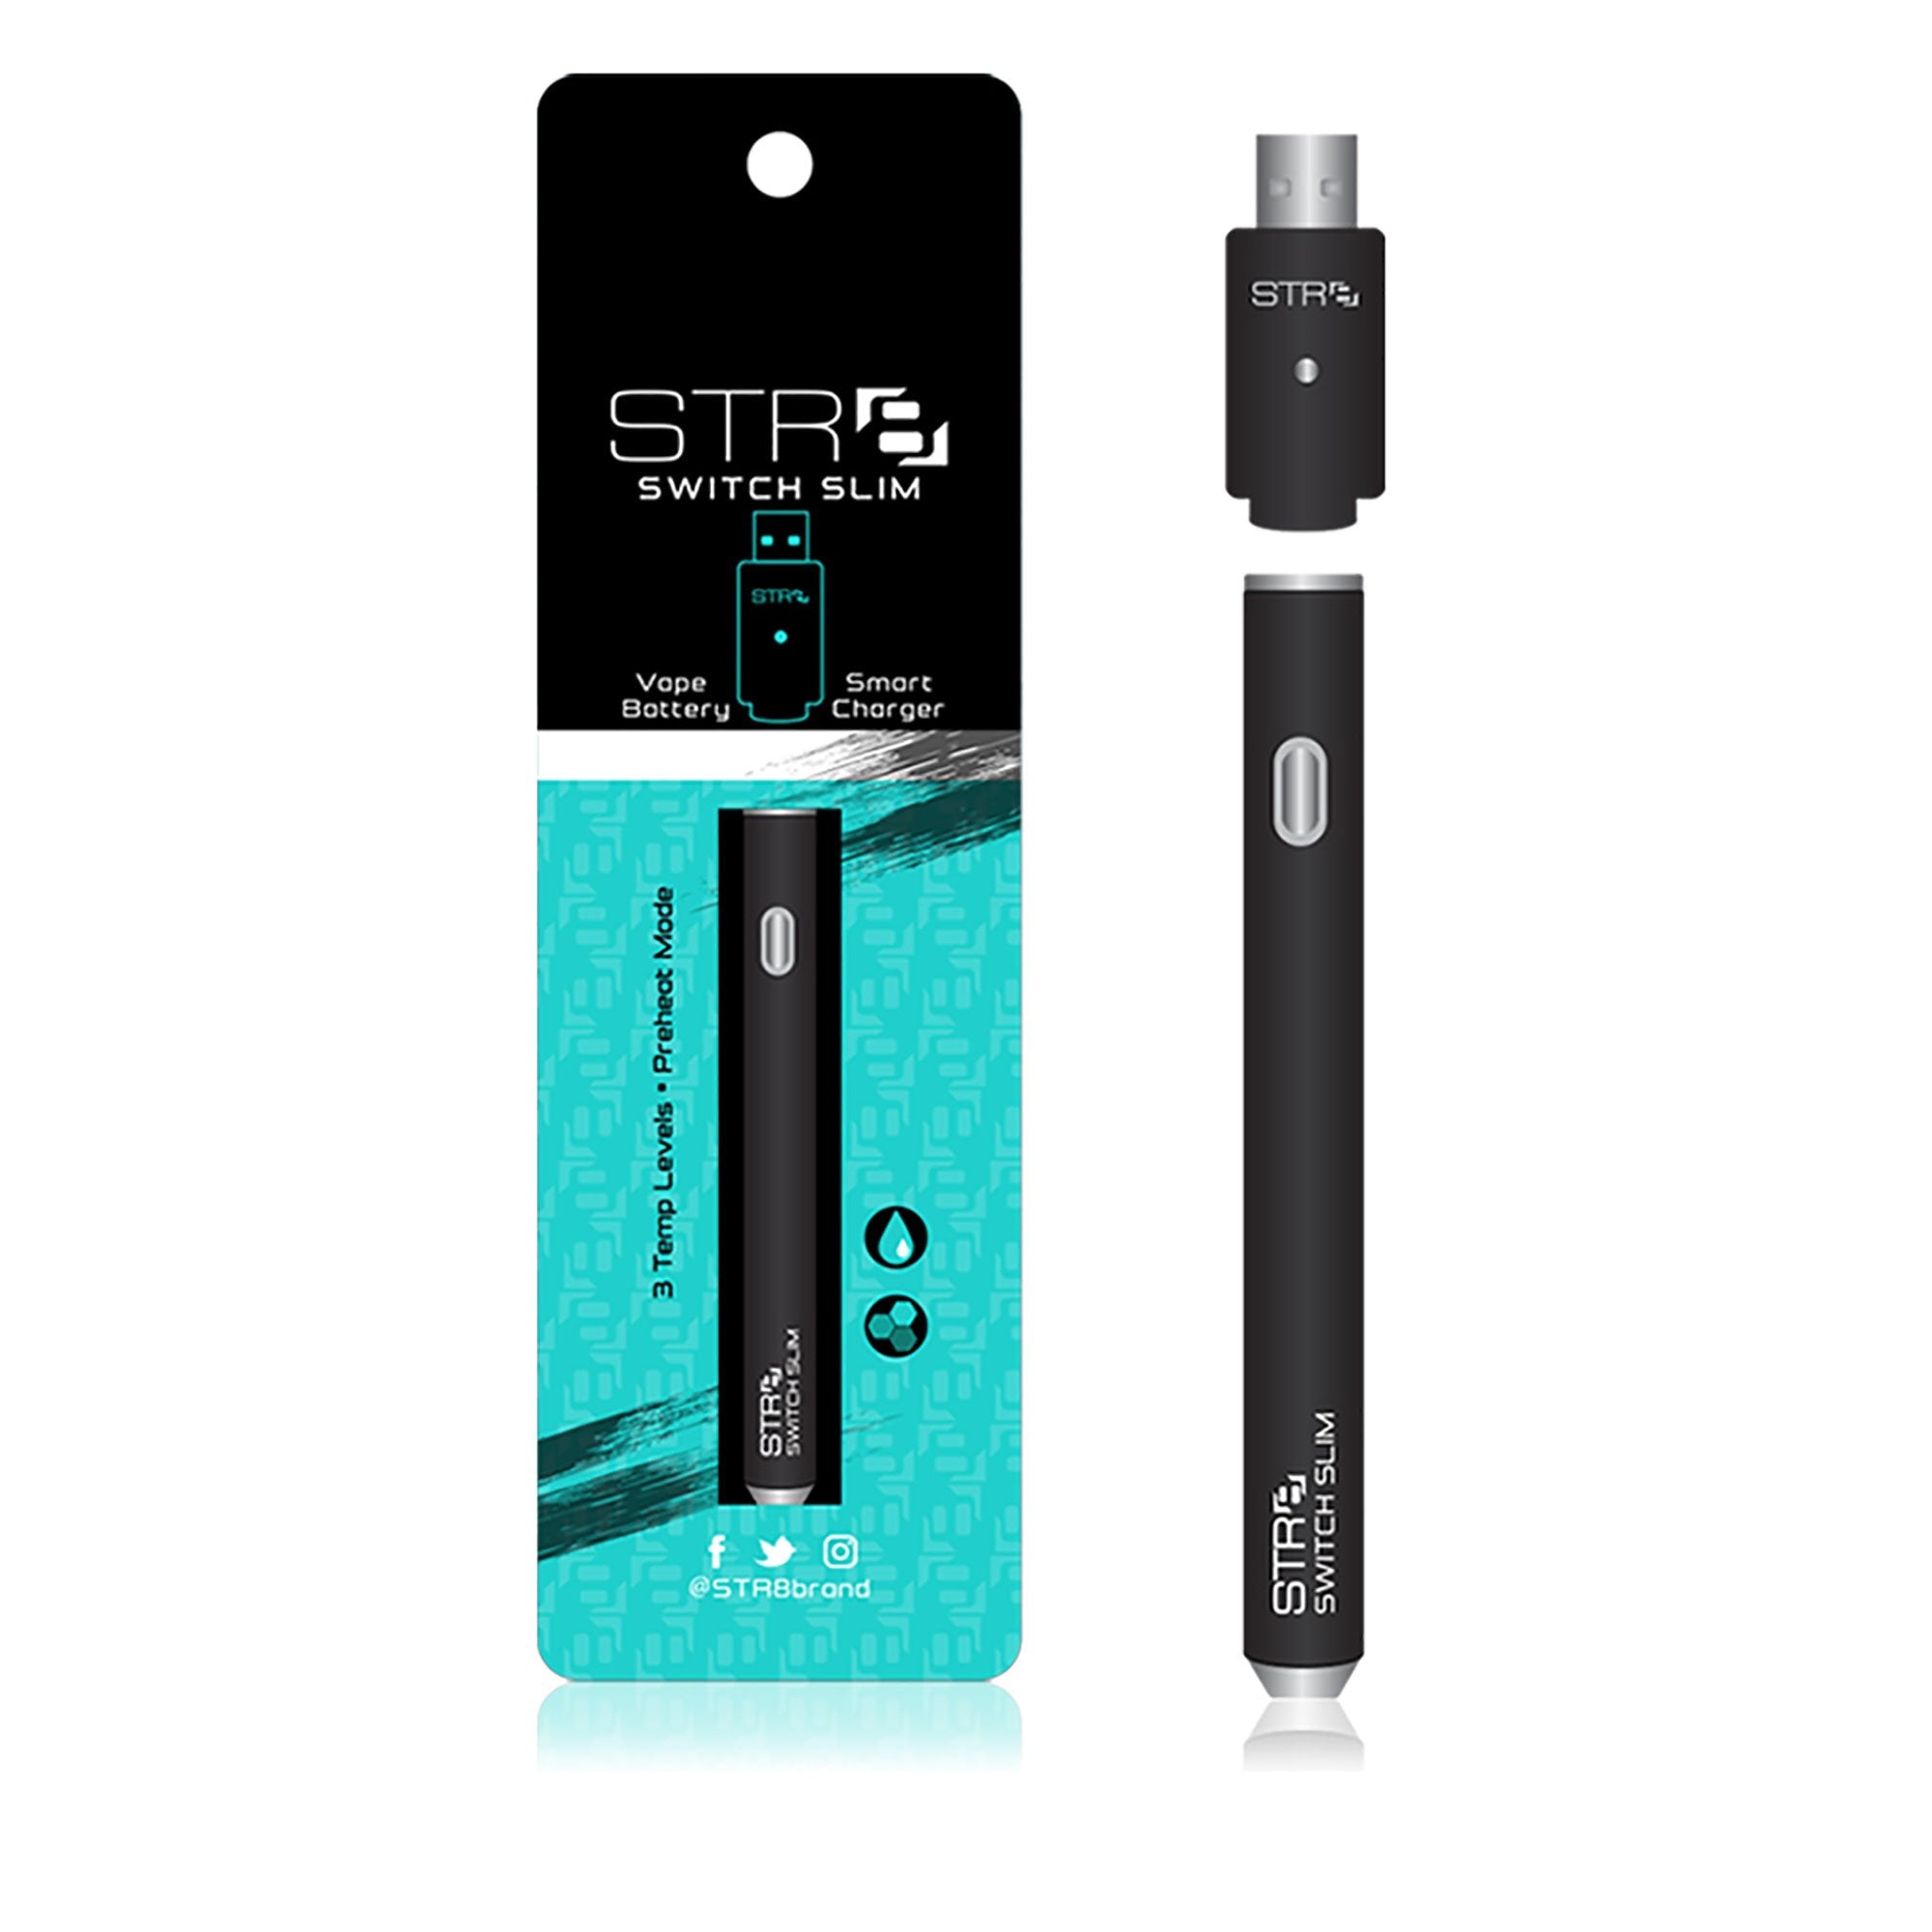 STR8 | Black Switch Slim Vape Batteries with Charger | 280mAh - Black - 10 Count - 1